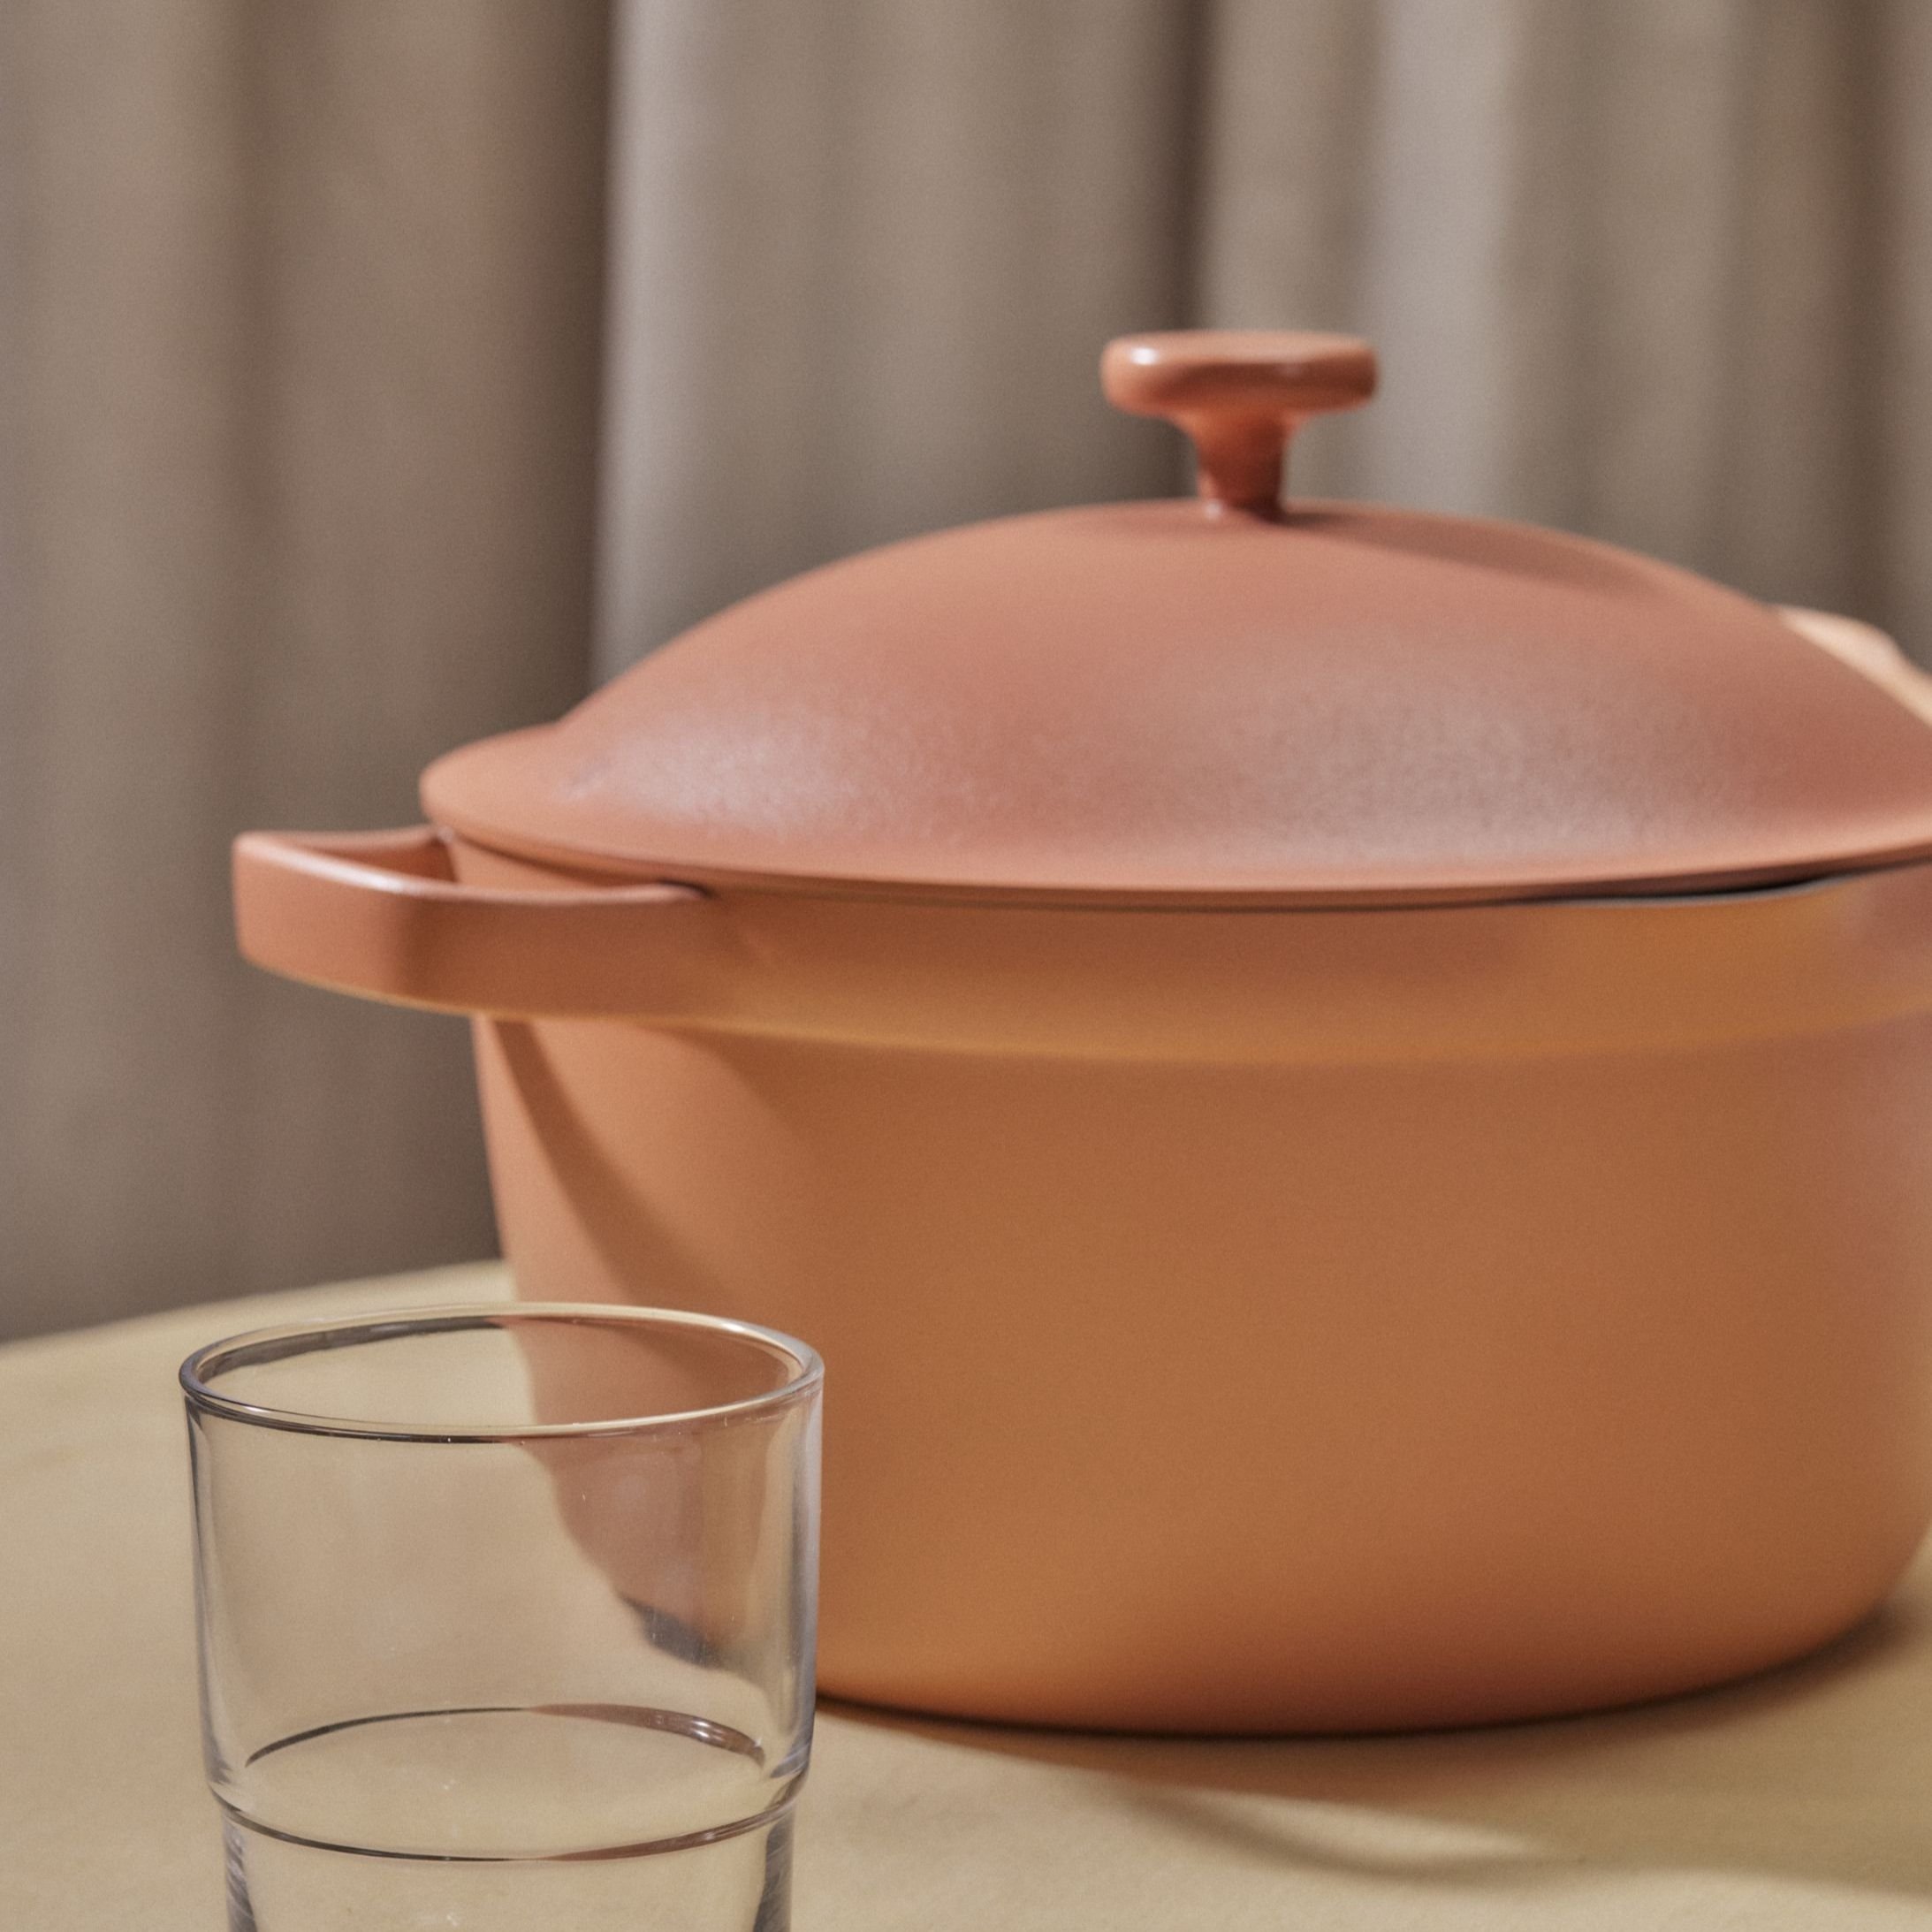 Our Place Perfect Pot Review: Black Friday 2022